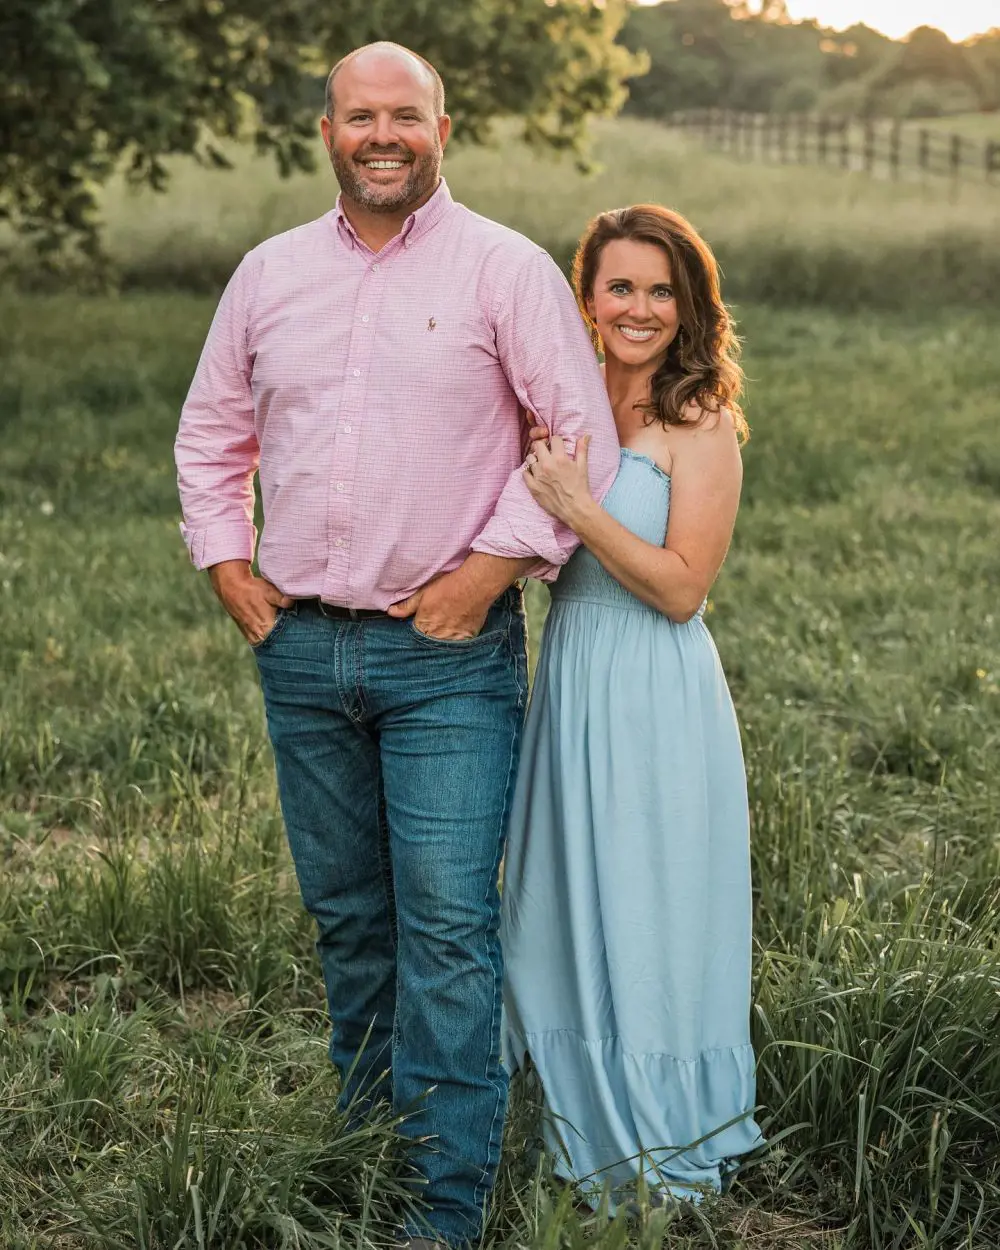 Eric and Courtney looks into the camera with smile on their faces during their couple photoshoot